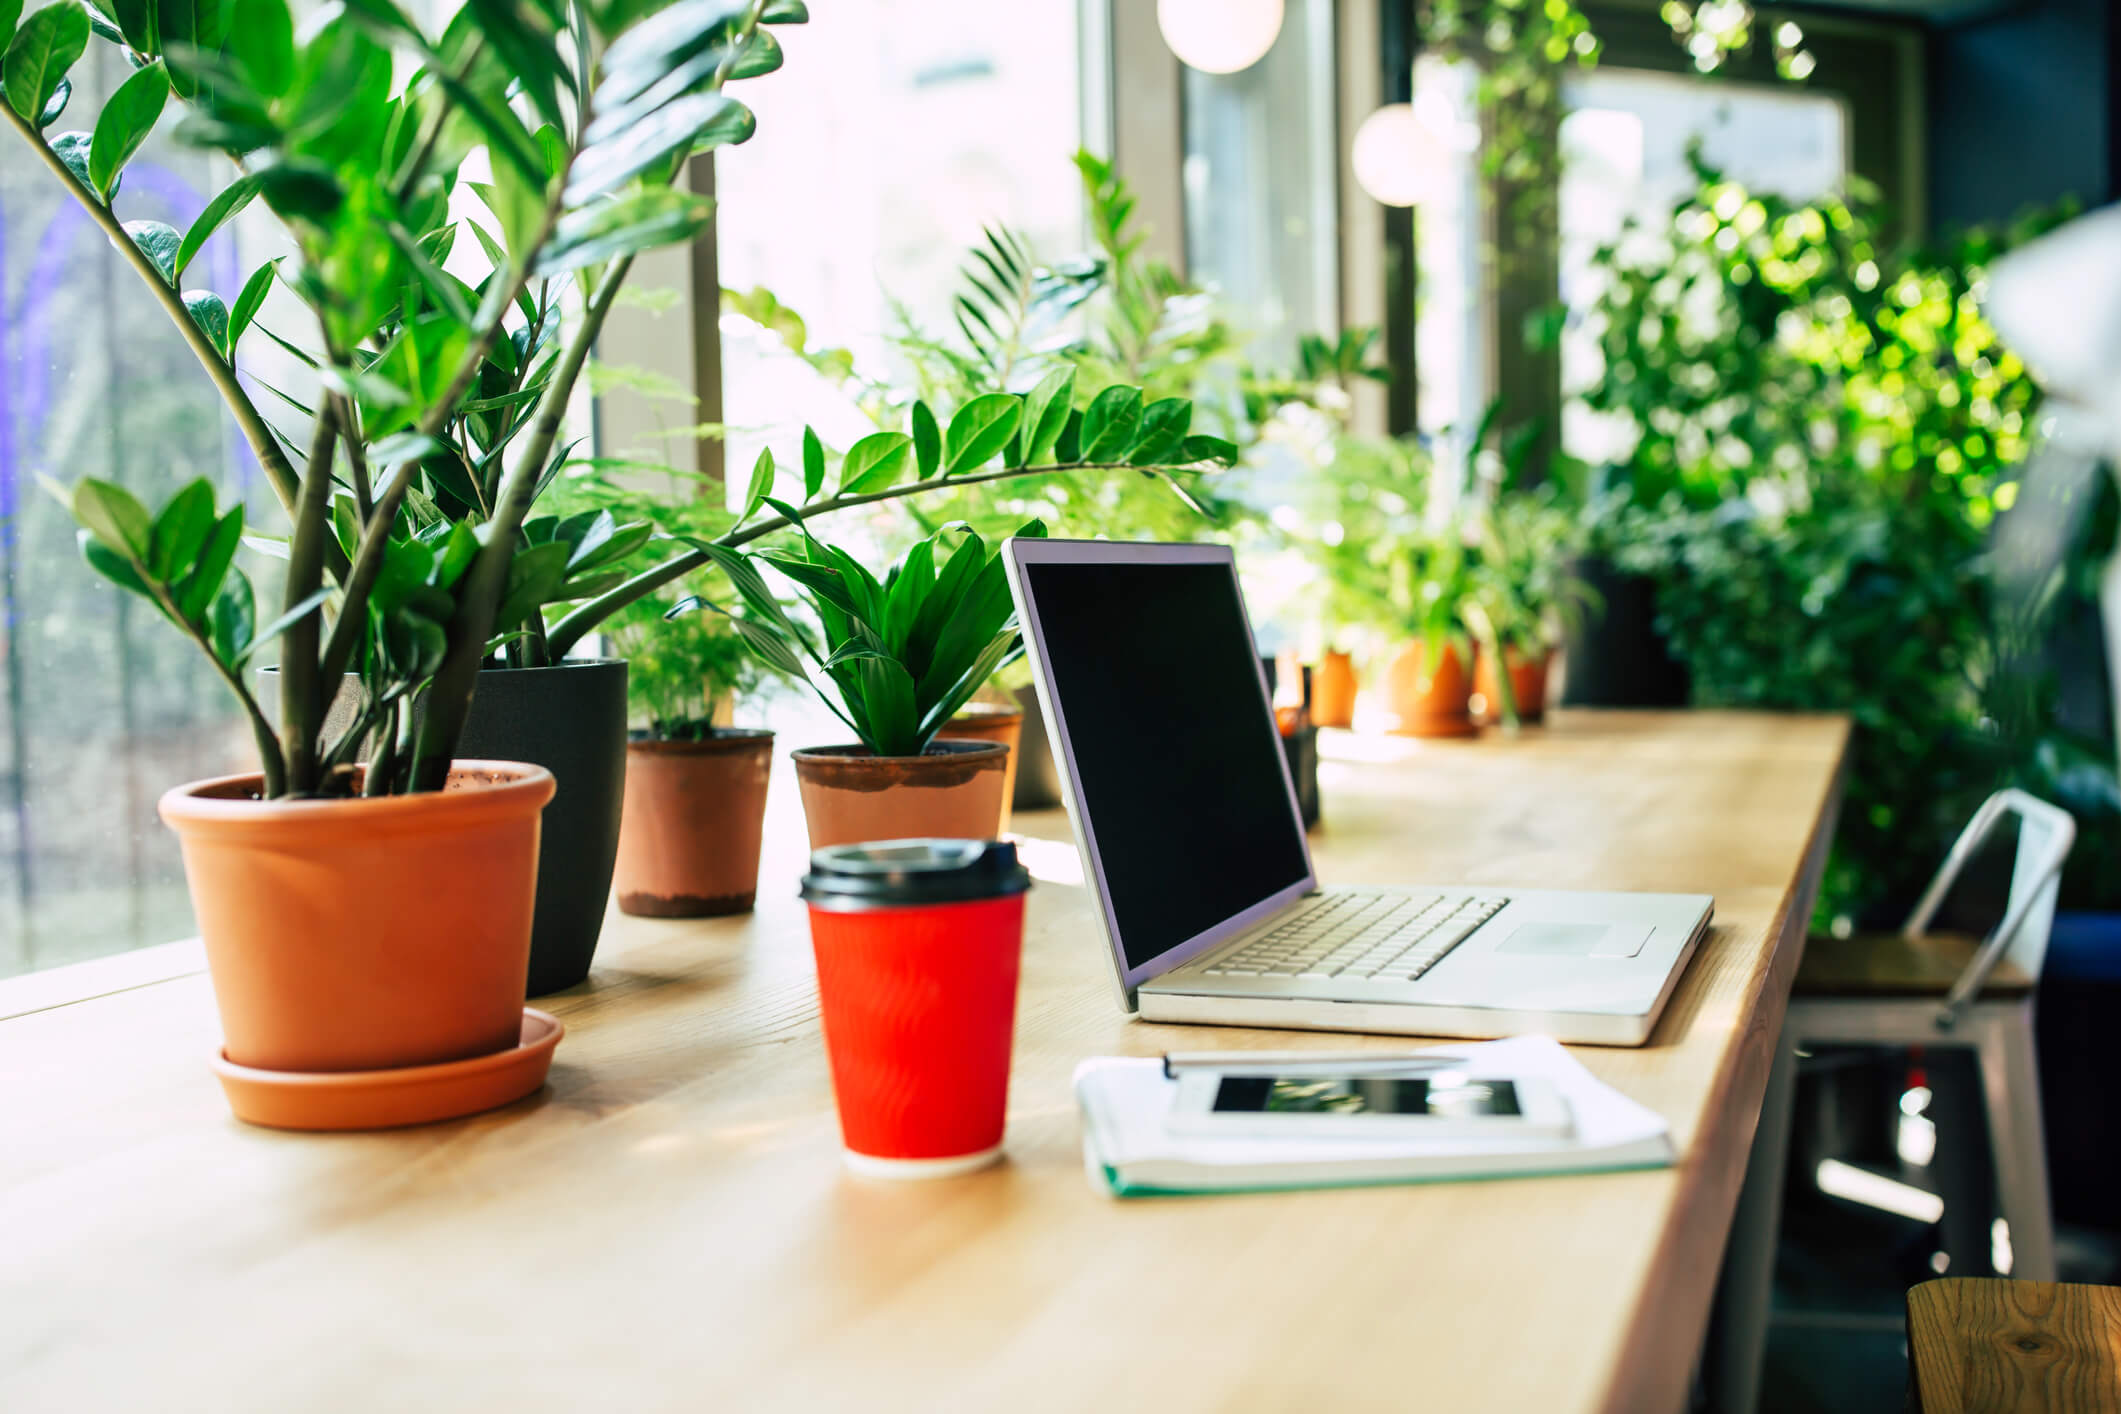 Must haves for the home office: plants on the desk in the home office.